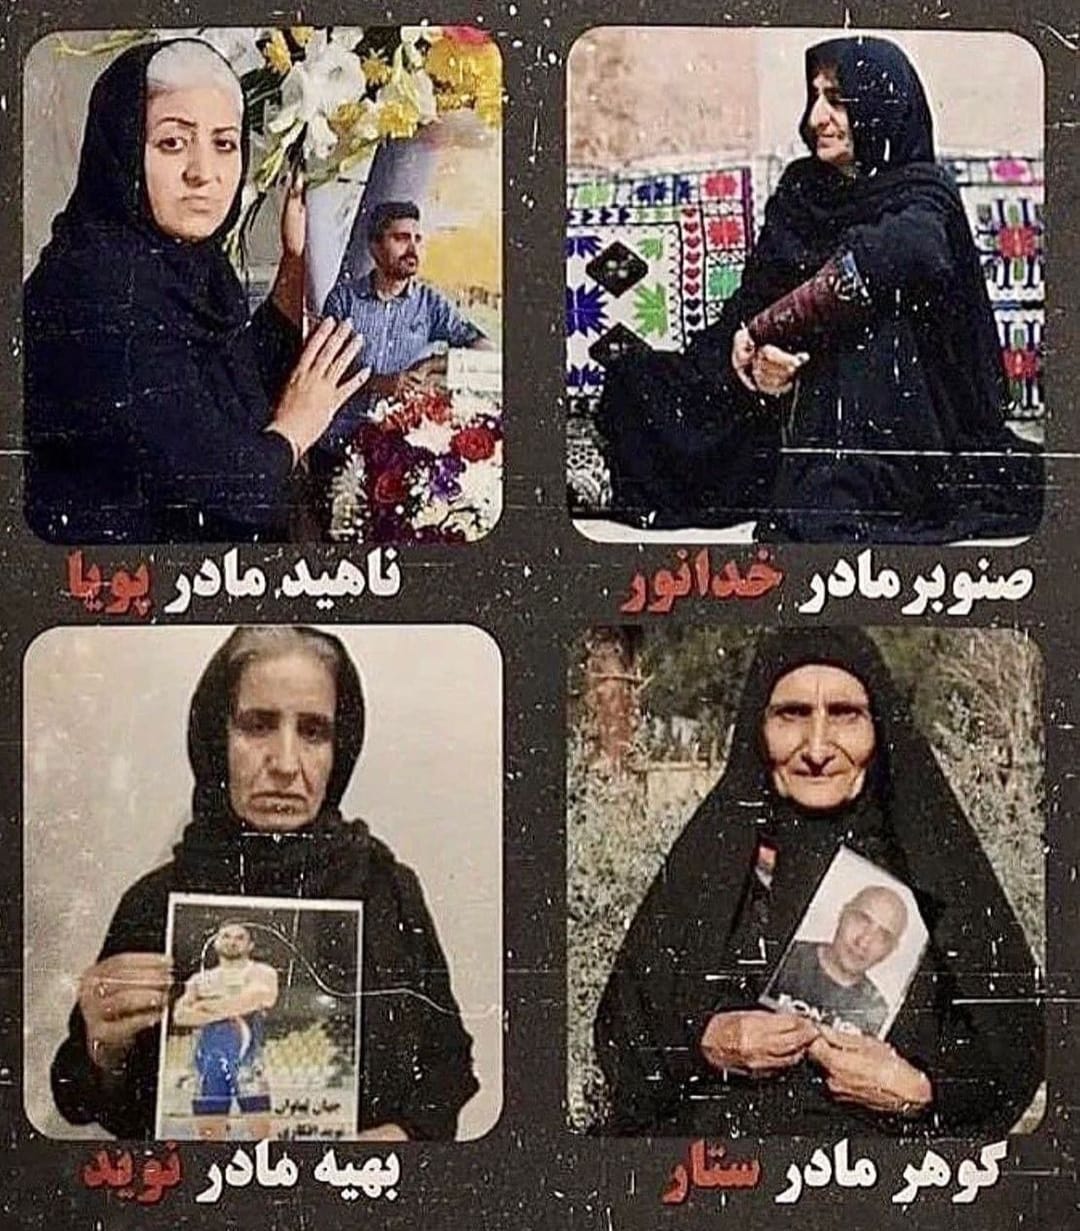 Mothers of murdered/executed dissidents are on the front line of opposition to Iran's brutal Islamic regime